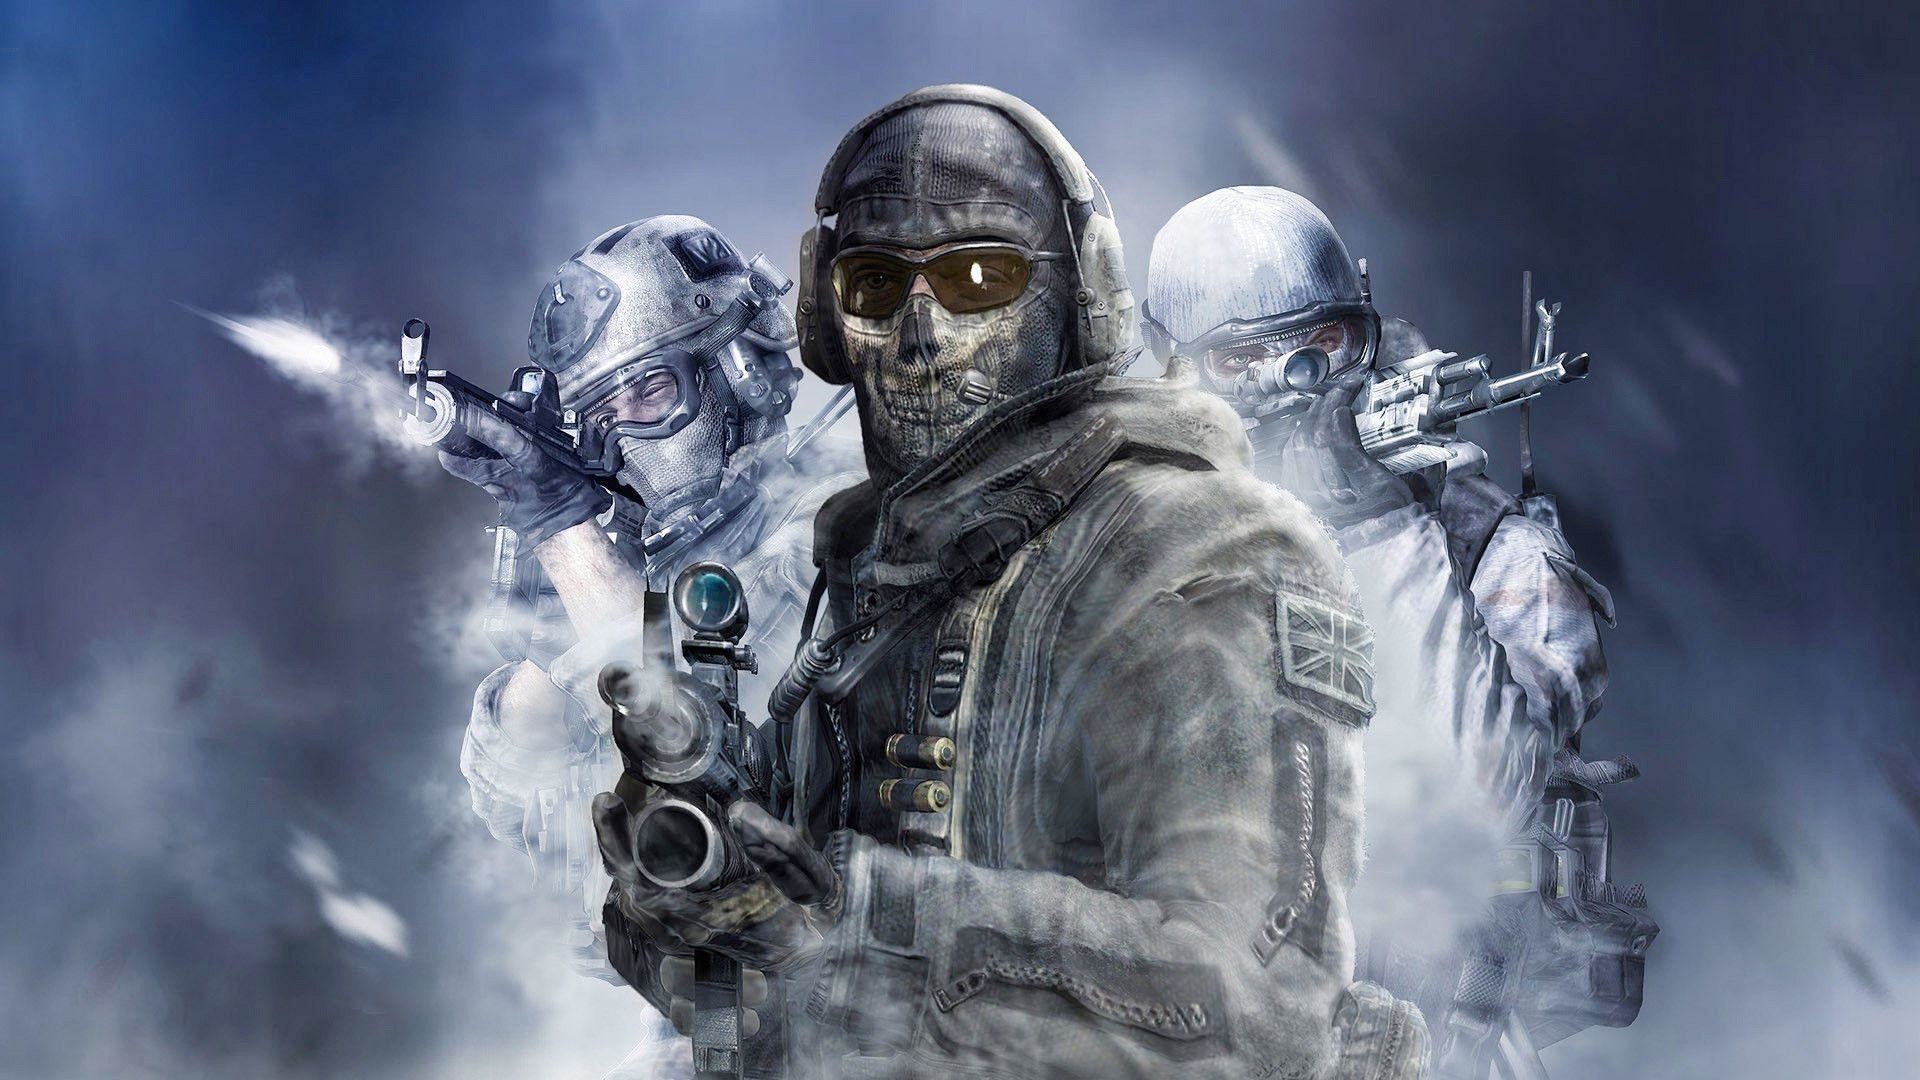 1920x1080 Call of Duty Ghosts Wallpapers  in HD | Call of Duty .